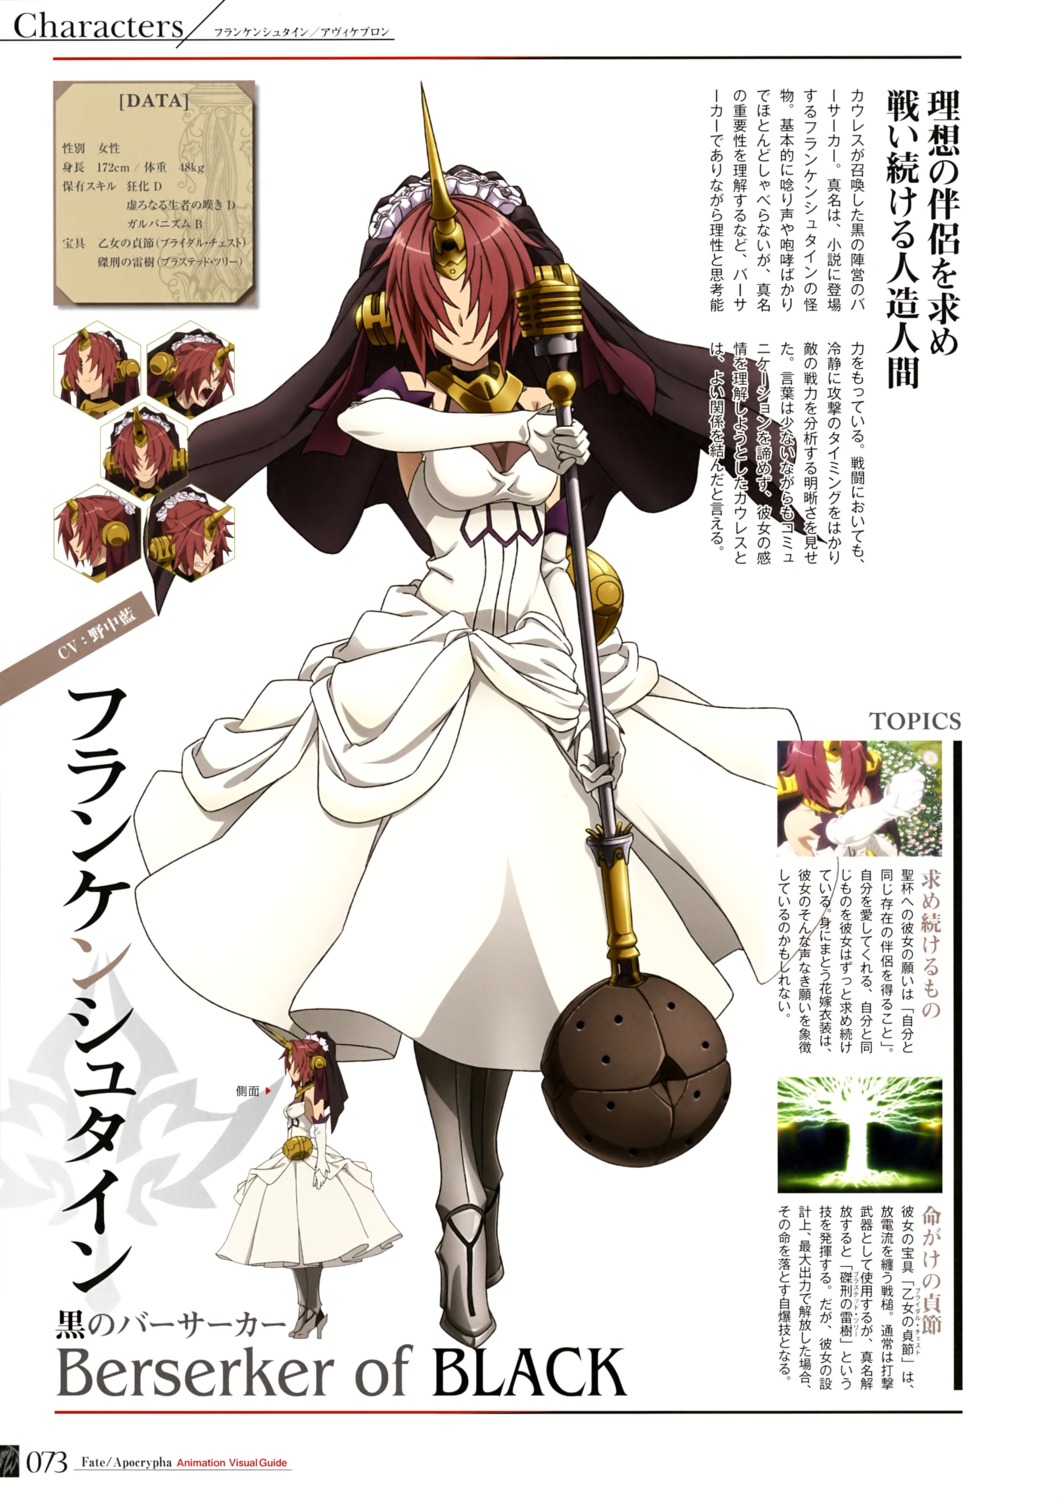 Fate Apocrypha Fate Stay Night Armor Character Design Dress Expression Profile Page Weapon 5544 Yande Re